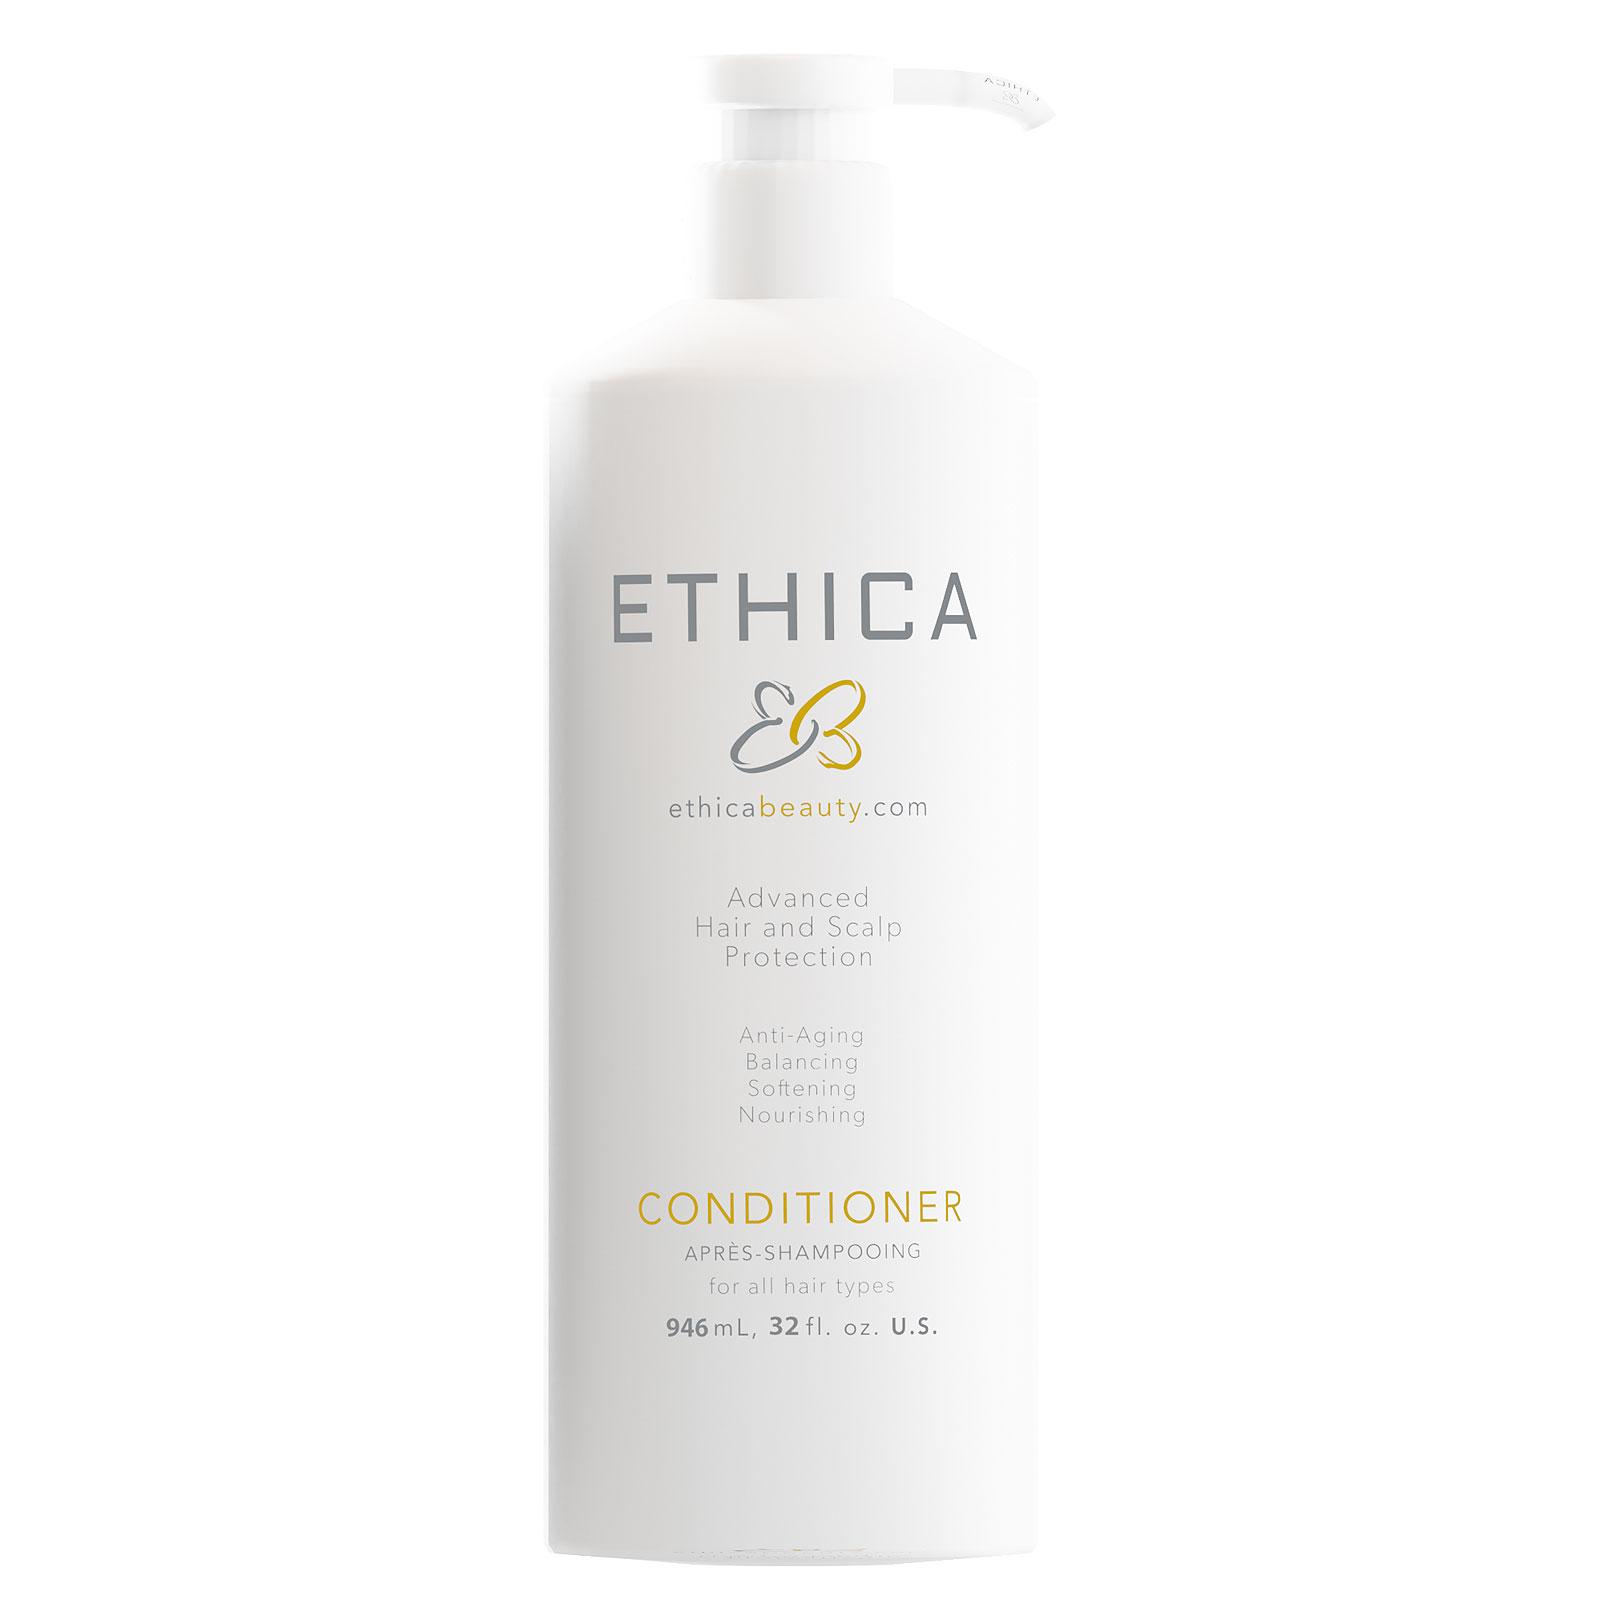 Ethica Anti-Aging Daily Conditioner 32oz